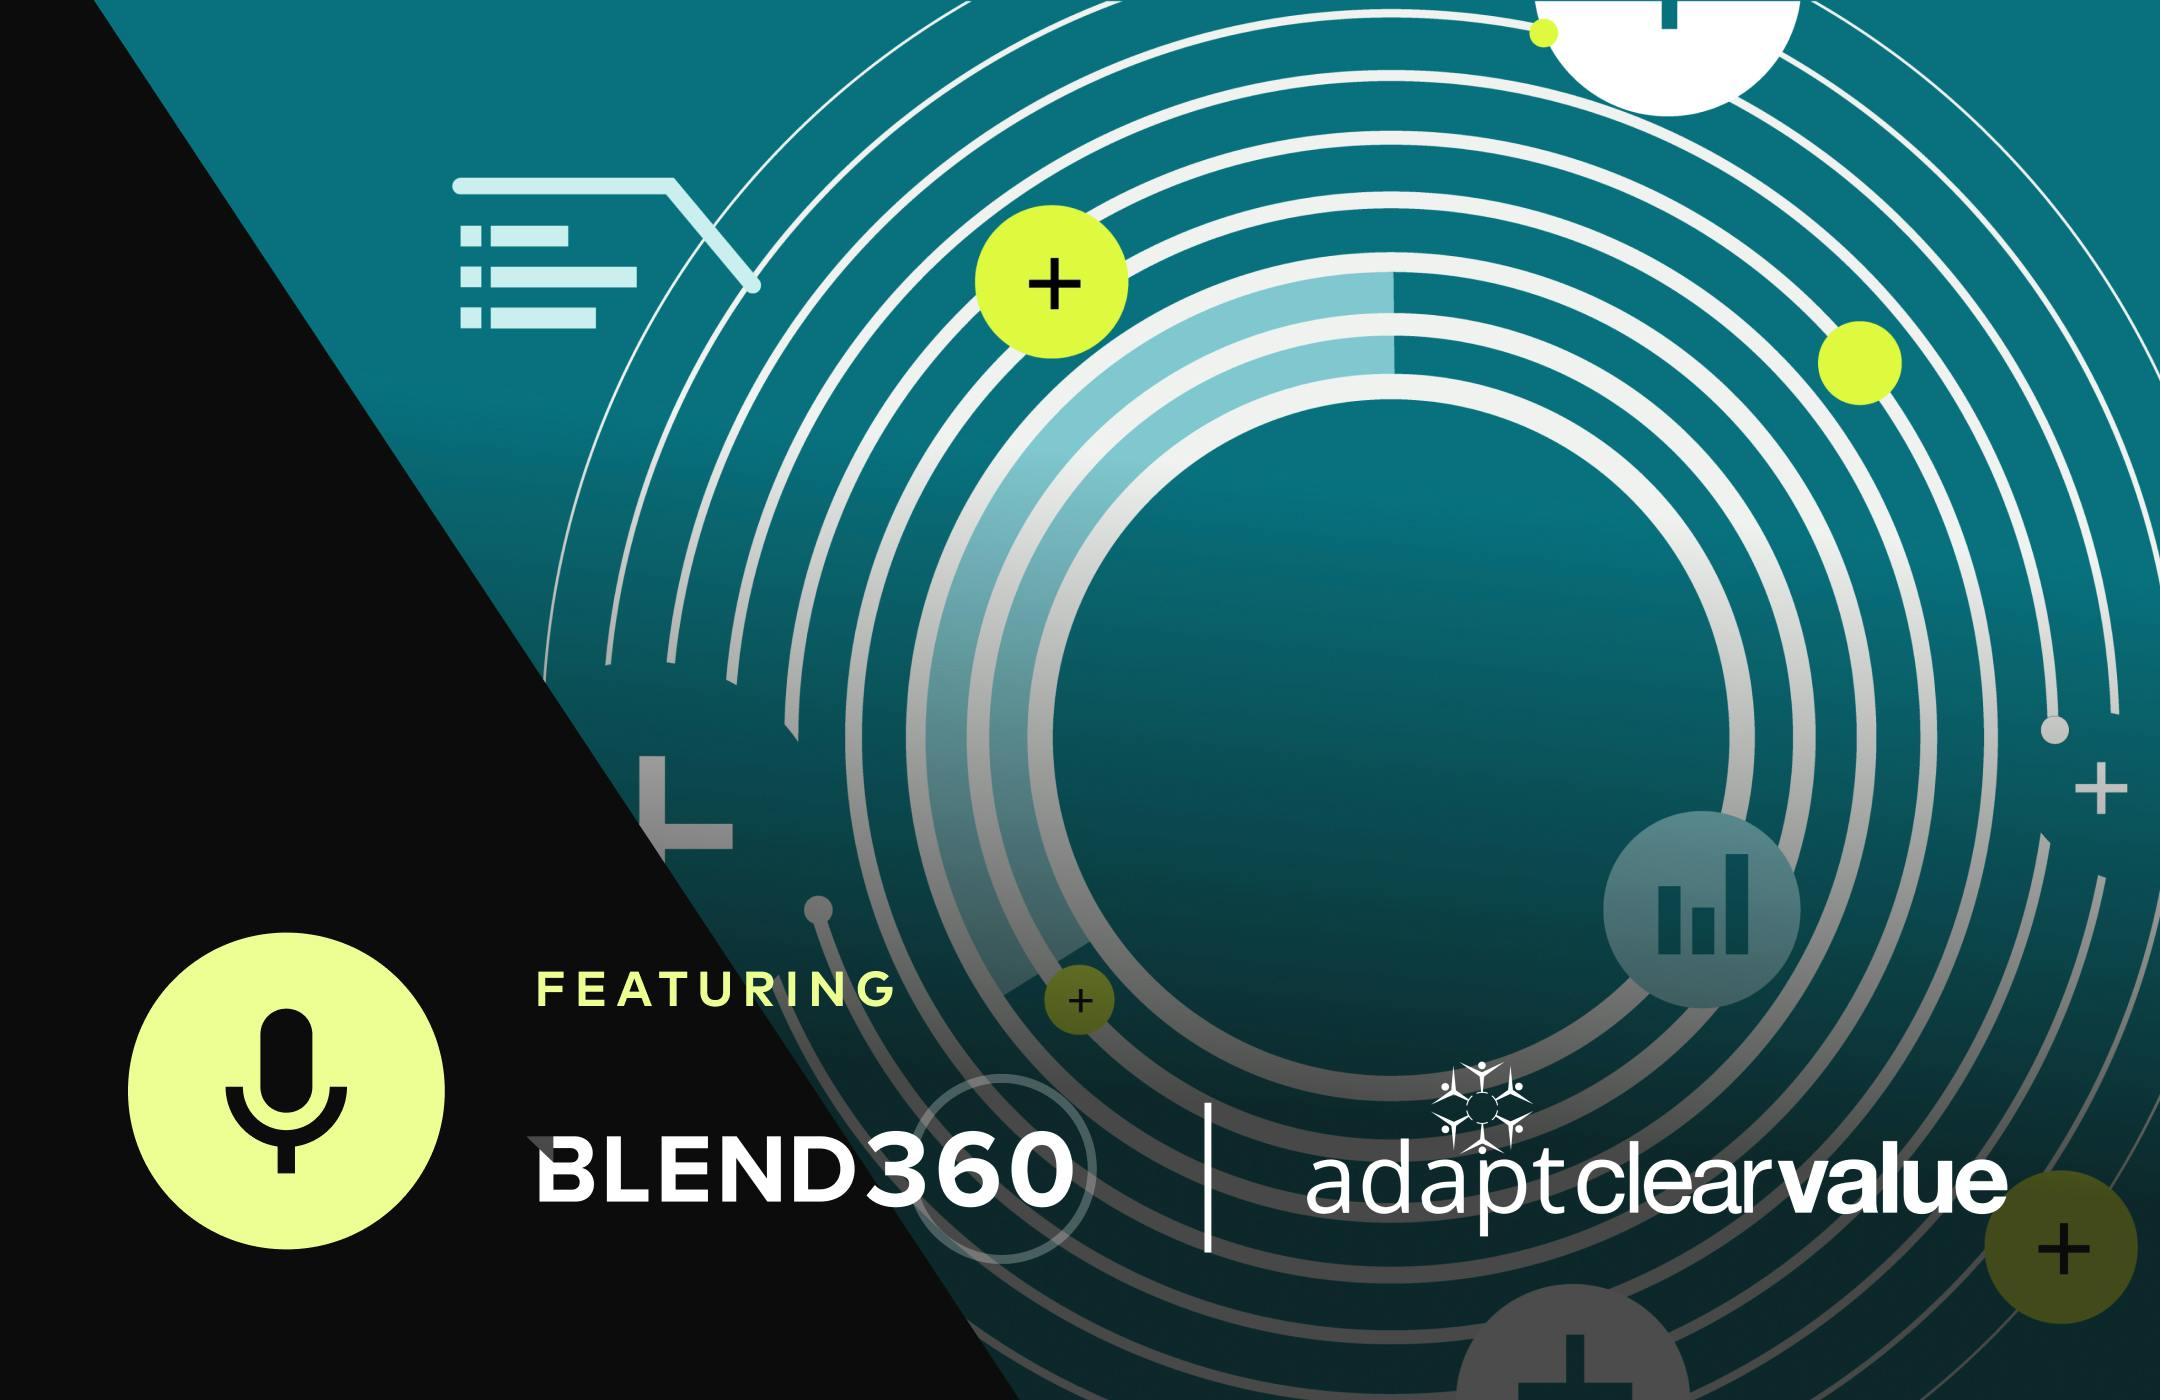 Webinar featuring Blend360 and Adapt Clear Value